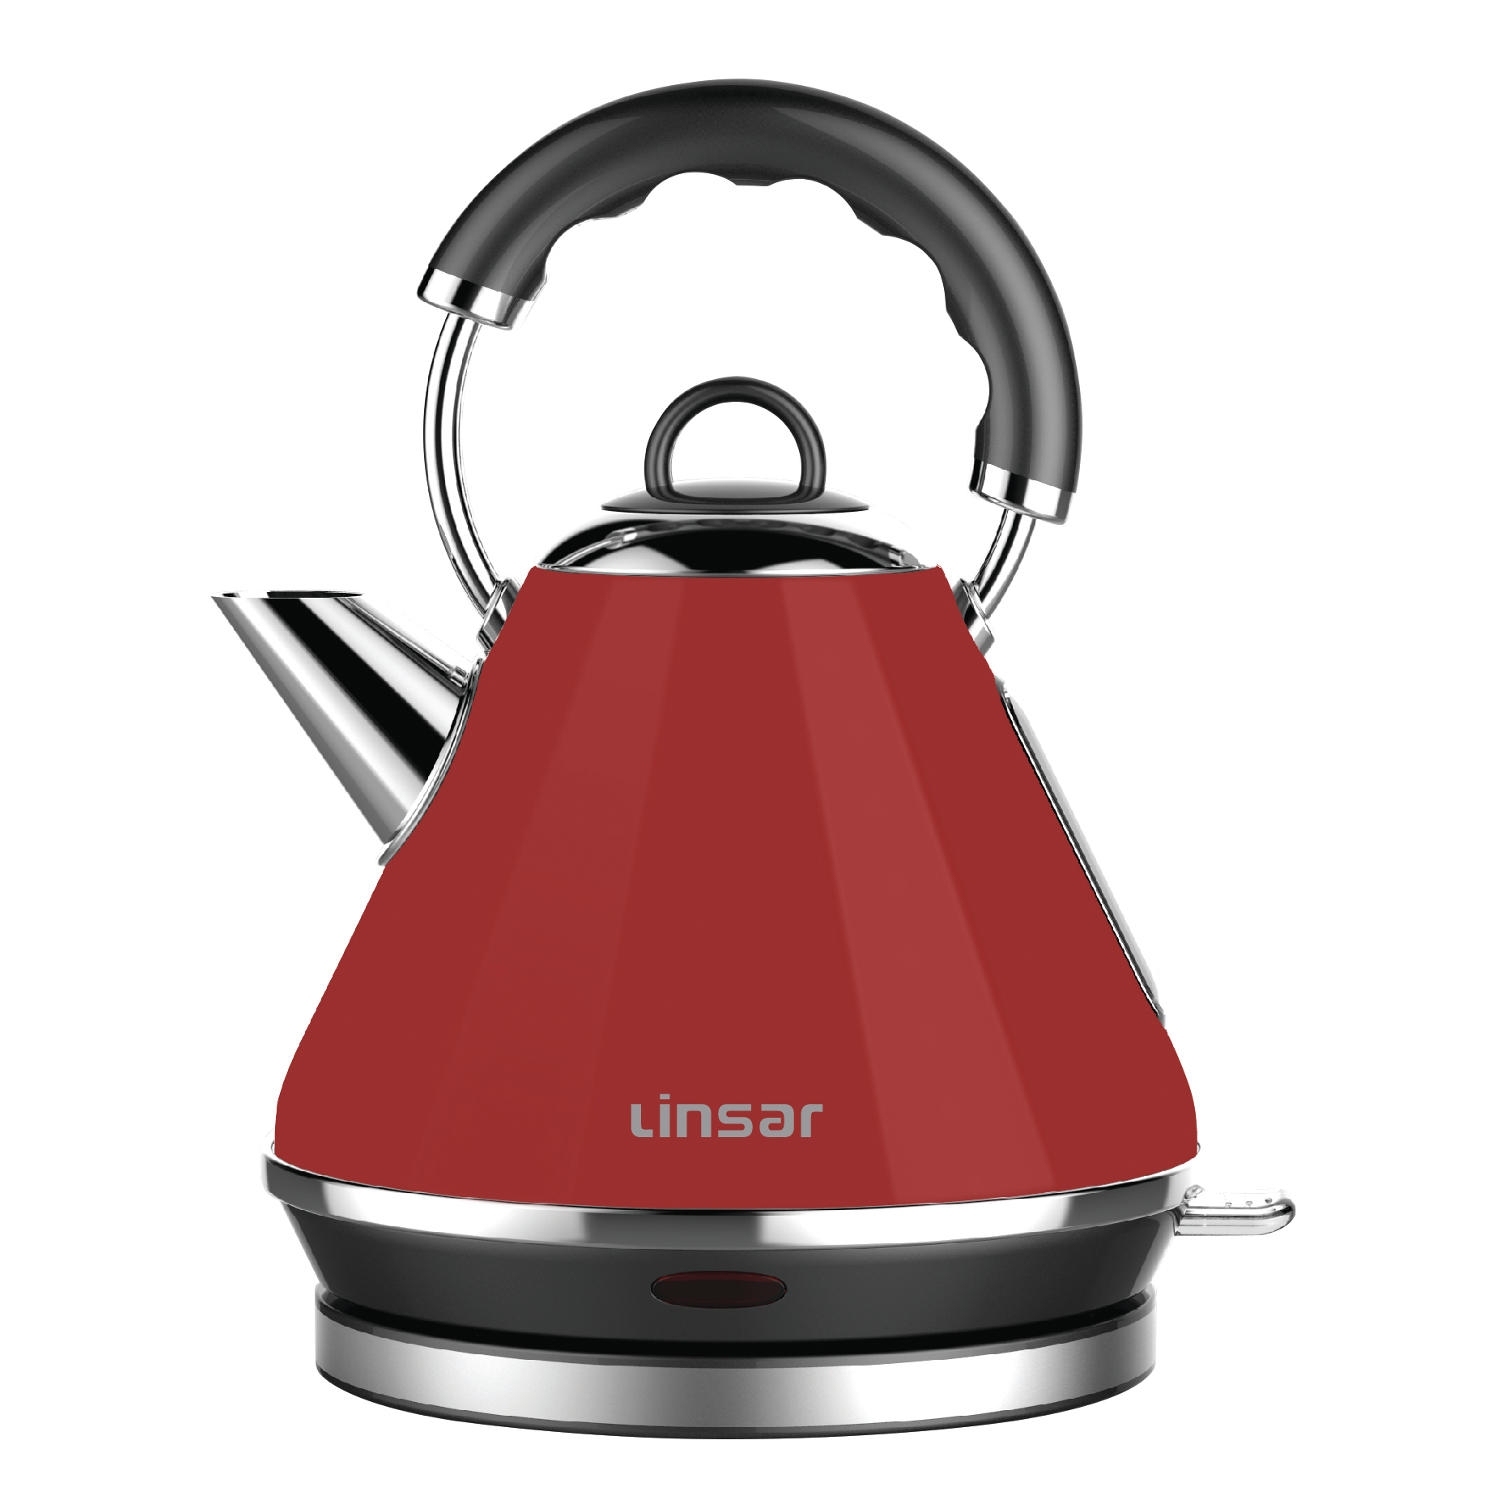 Linsar 1.7 Litre Pyramid Kettle - Red - 2